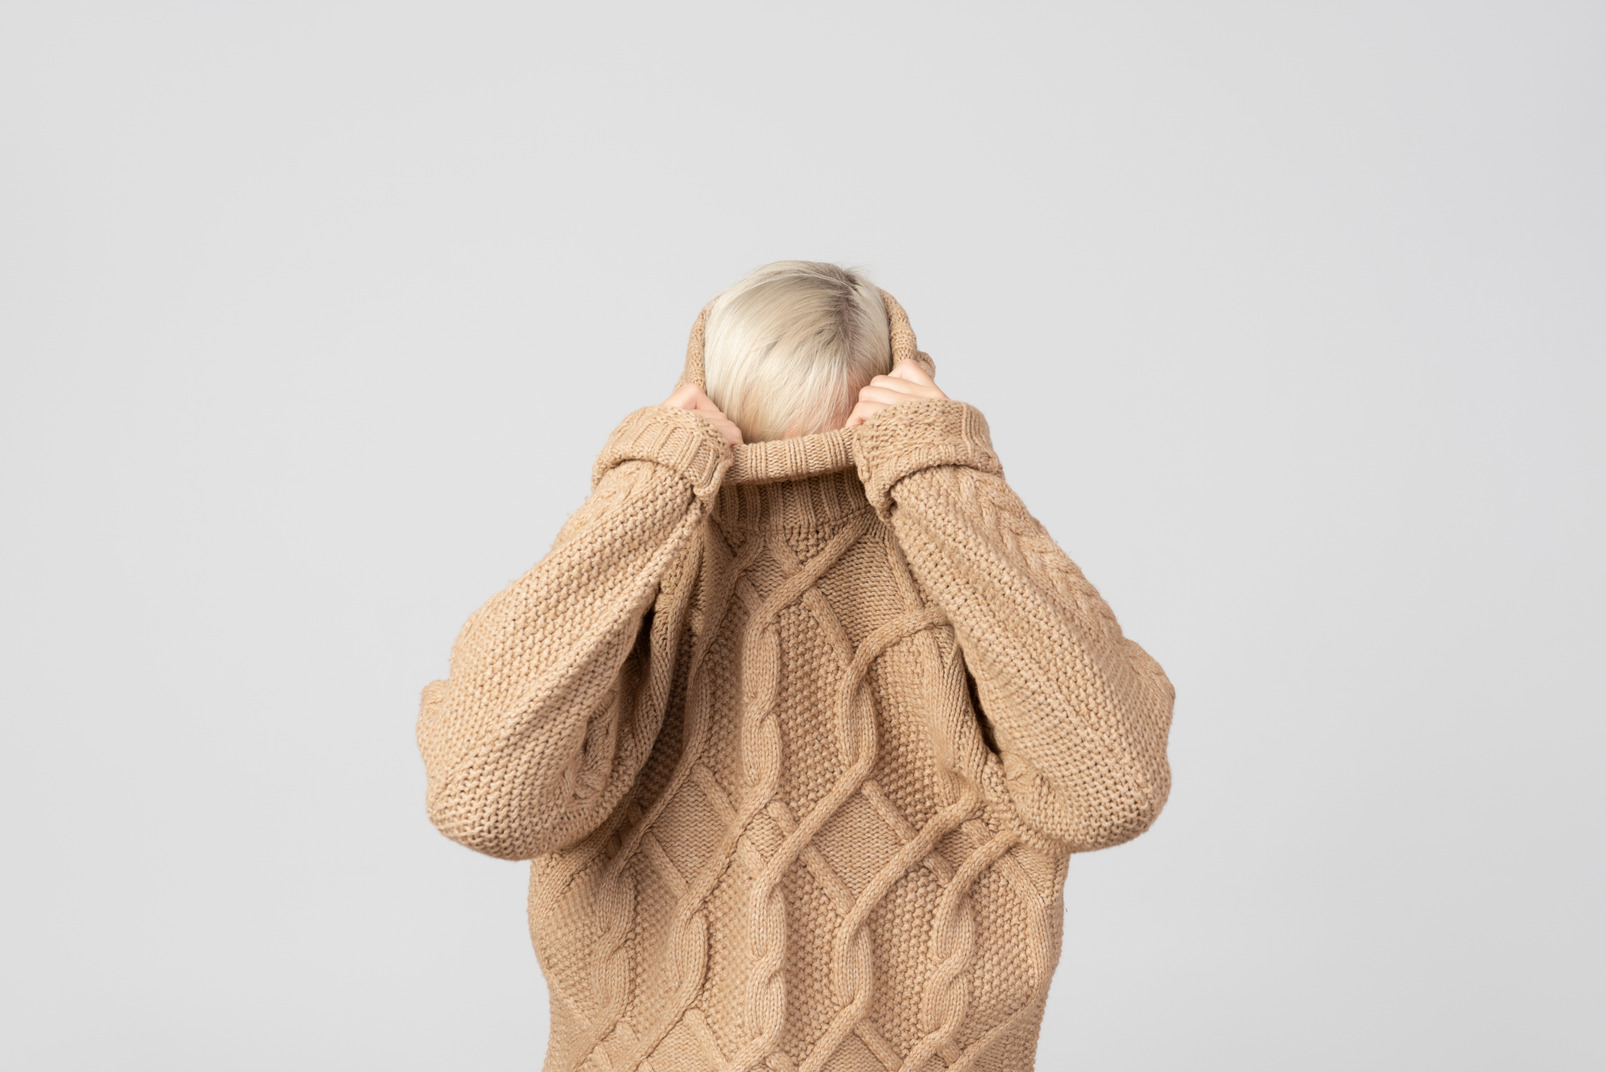 Young woman taking off her sweater